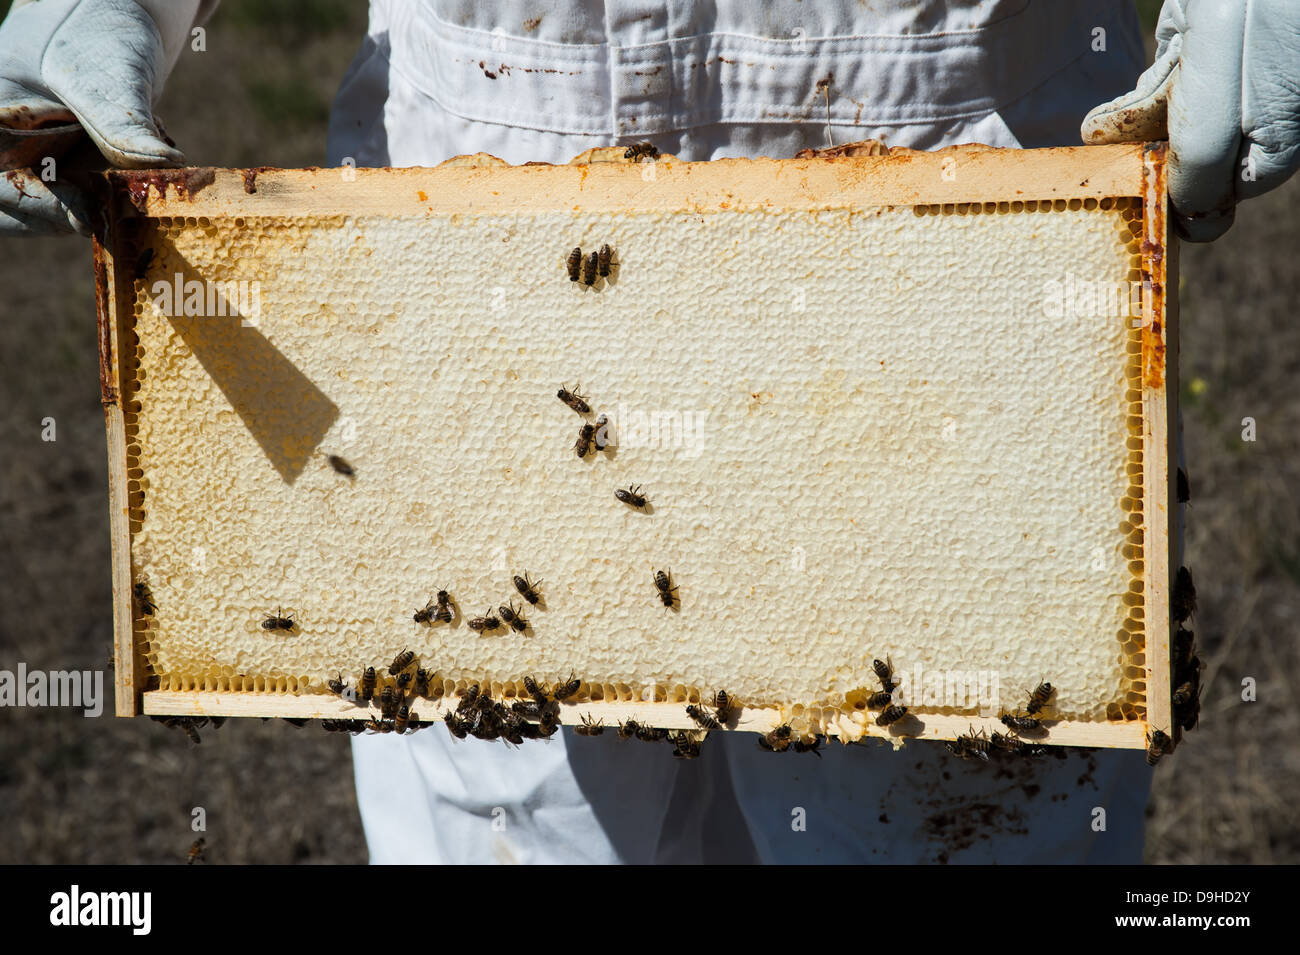 A beekeeper in Montana shows the honey harvest on one Langstroth frame. Stock Photo